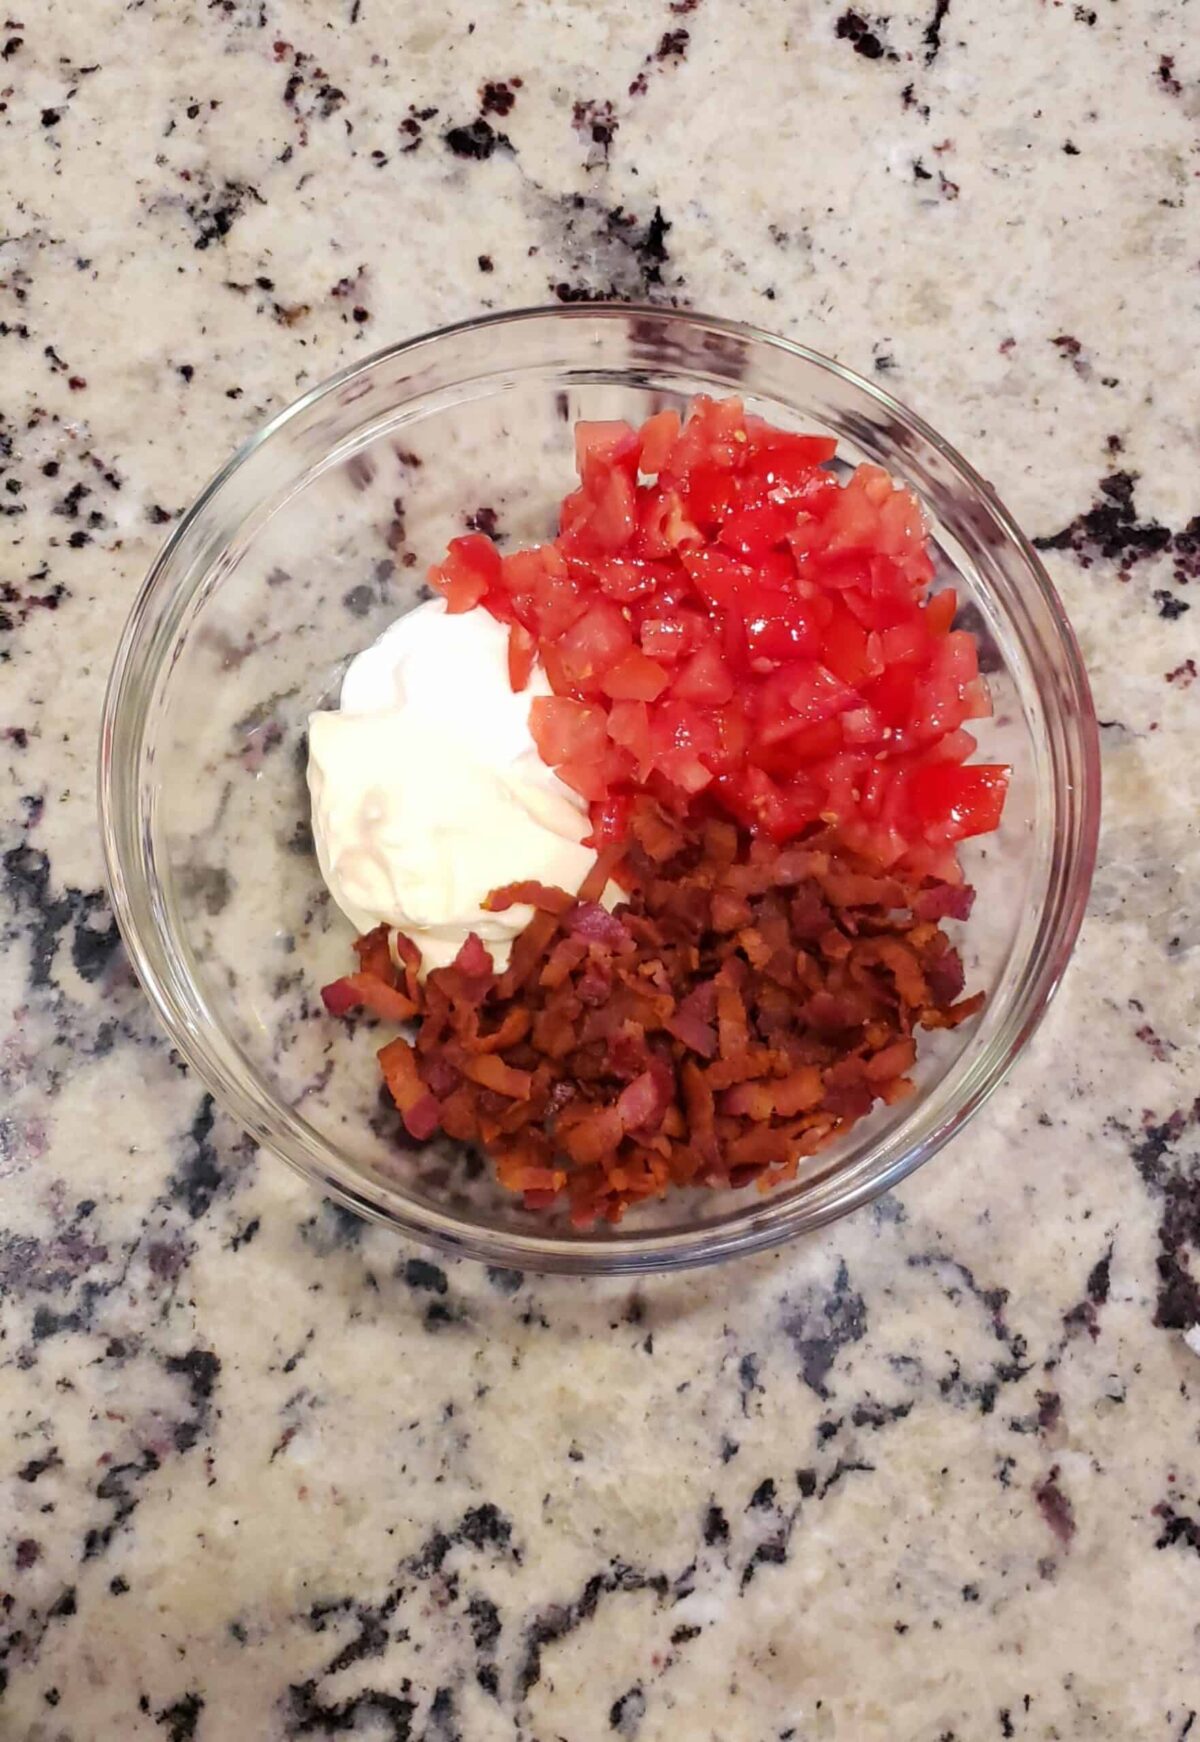 Combine the bacon, chopped tomato, mayo, and sour cream in a bowl and stir gently to make Bacon Tomato Dip